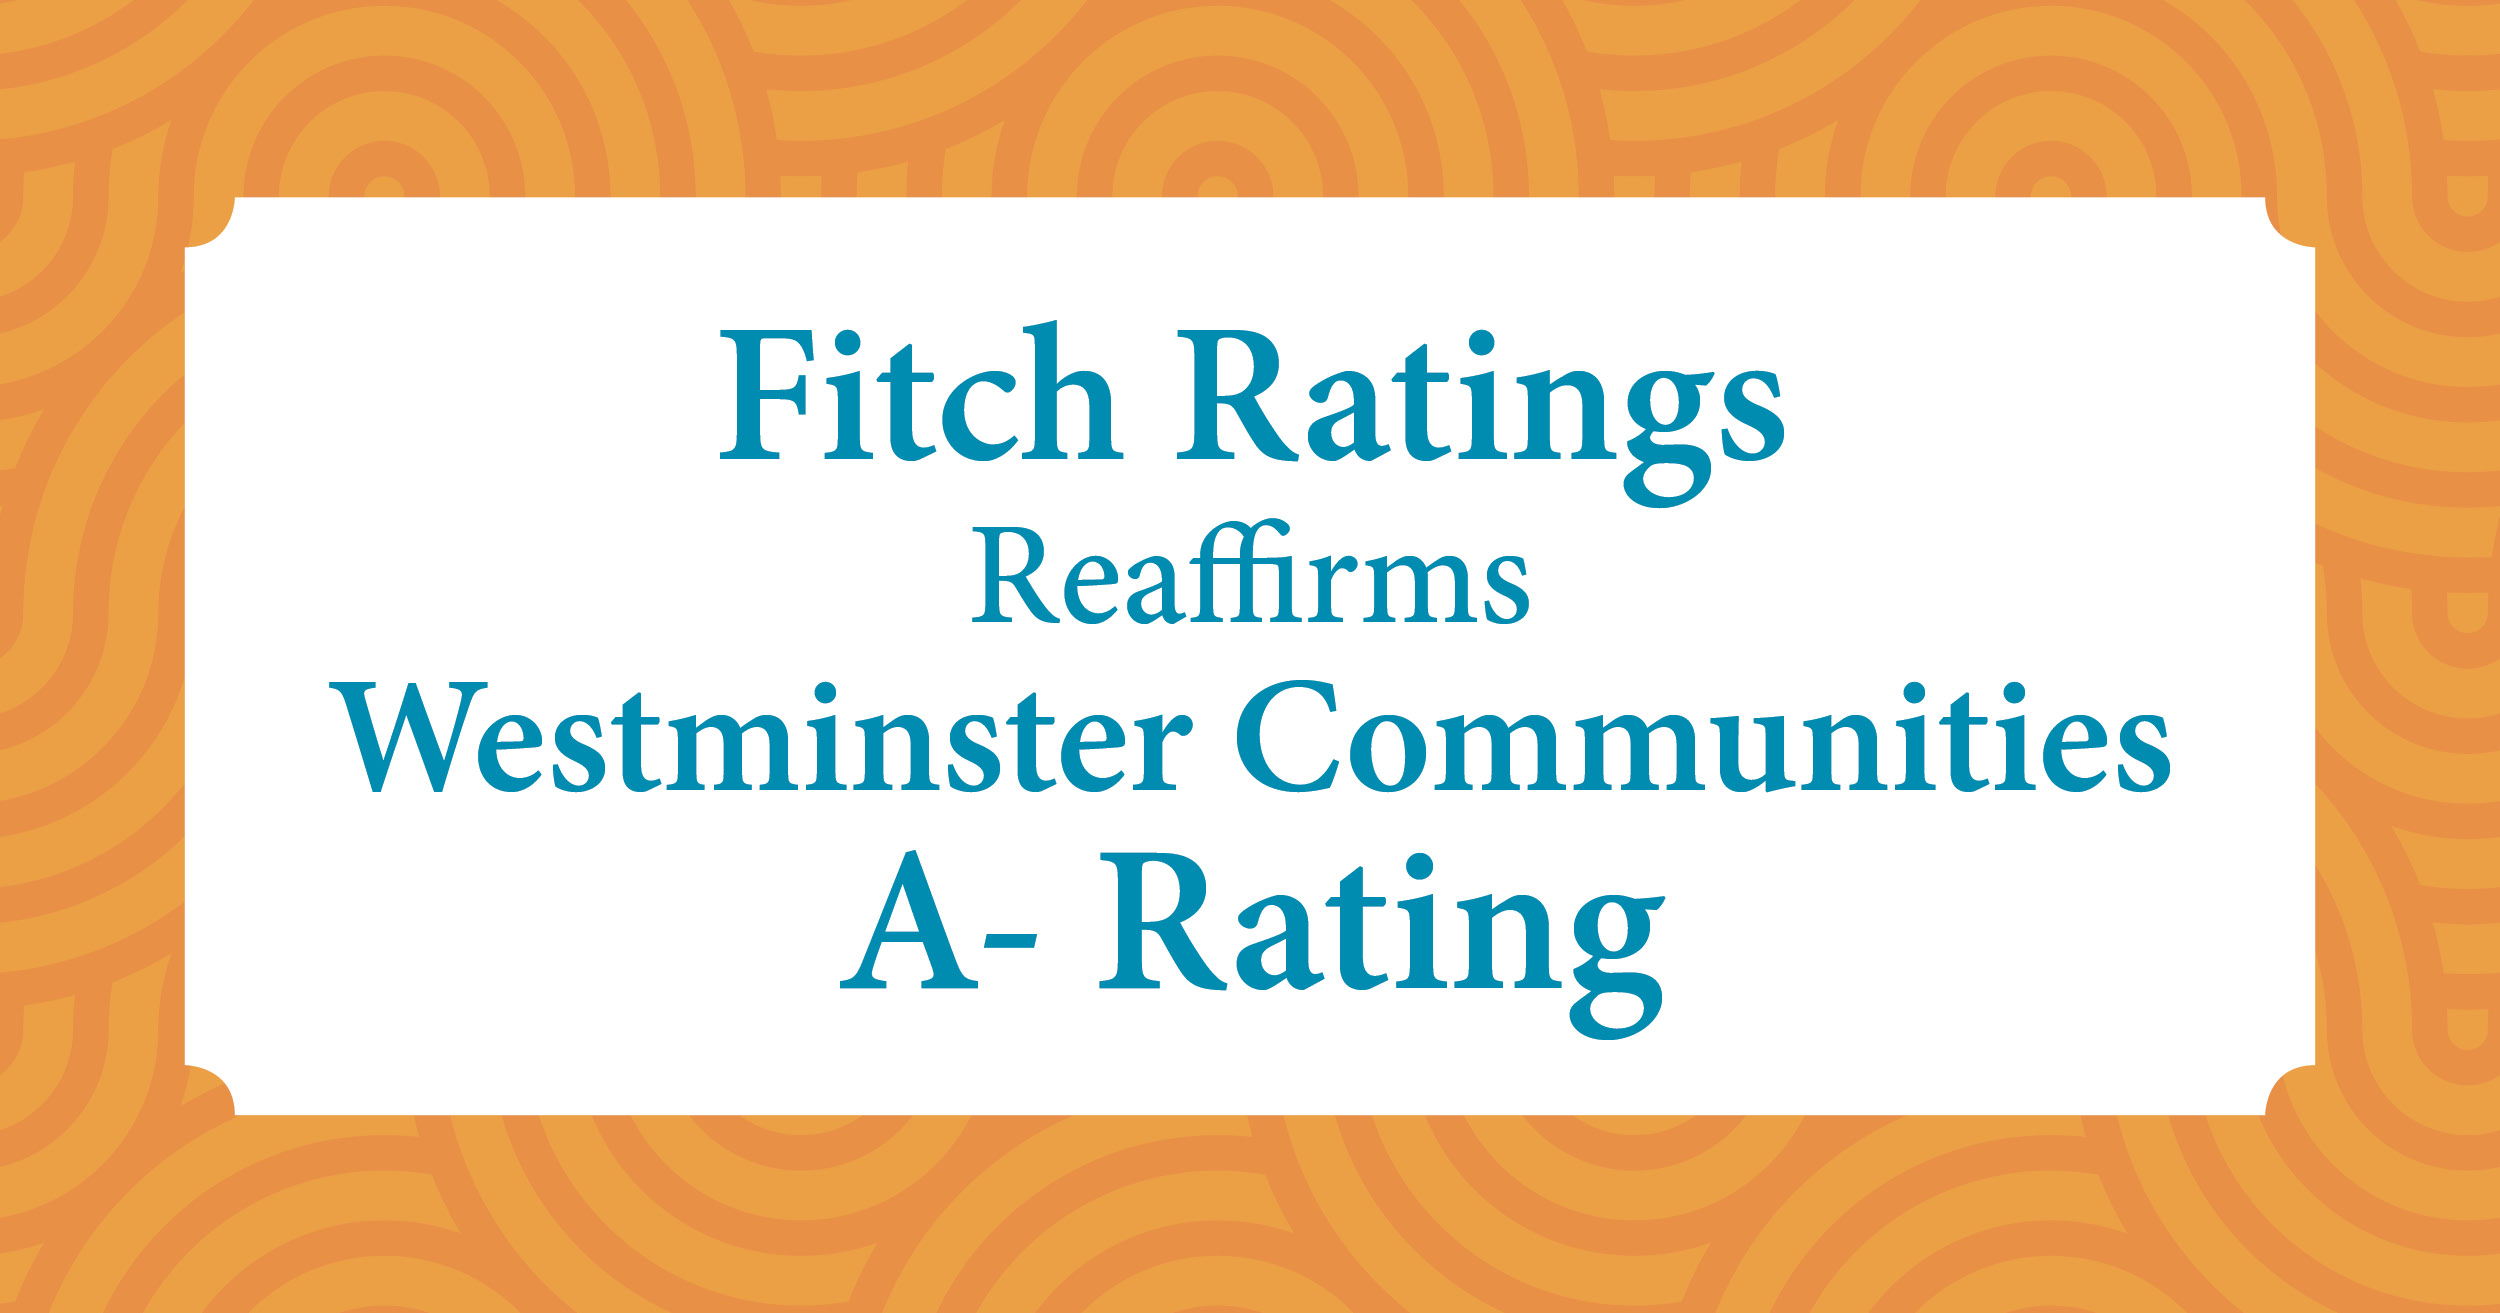 Fitch Ratings Reaffirms Westminster’s A- Bond Rating